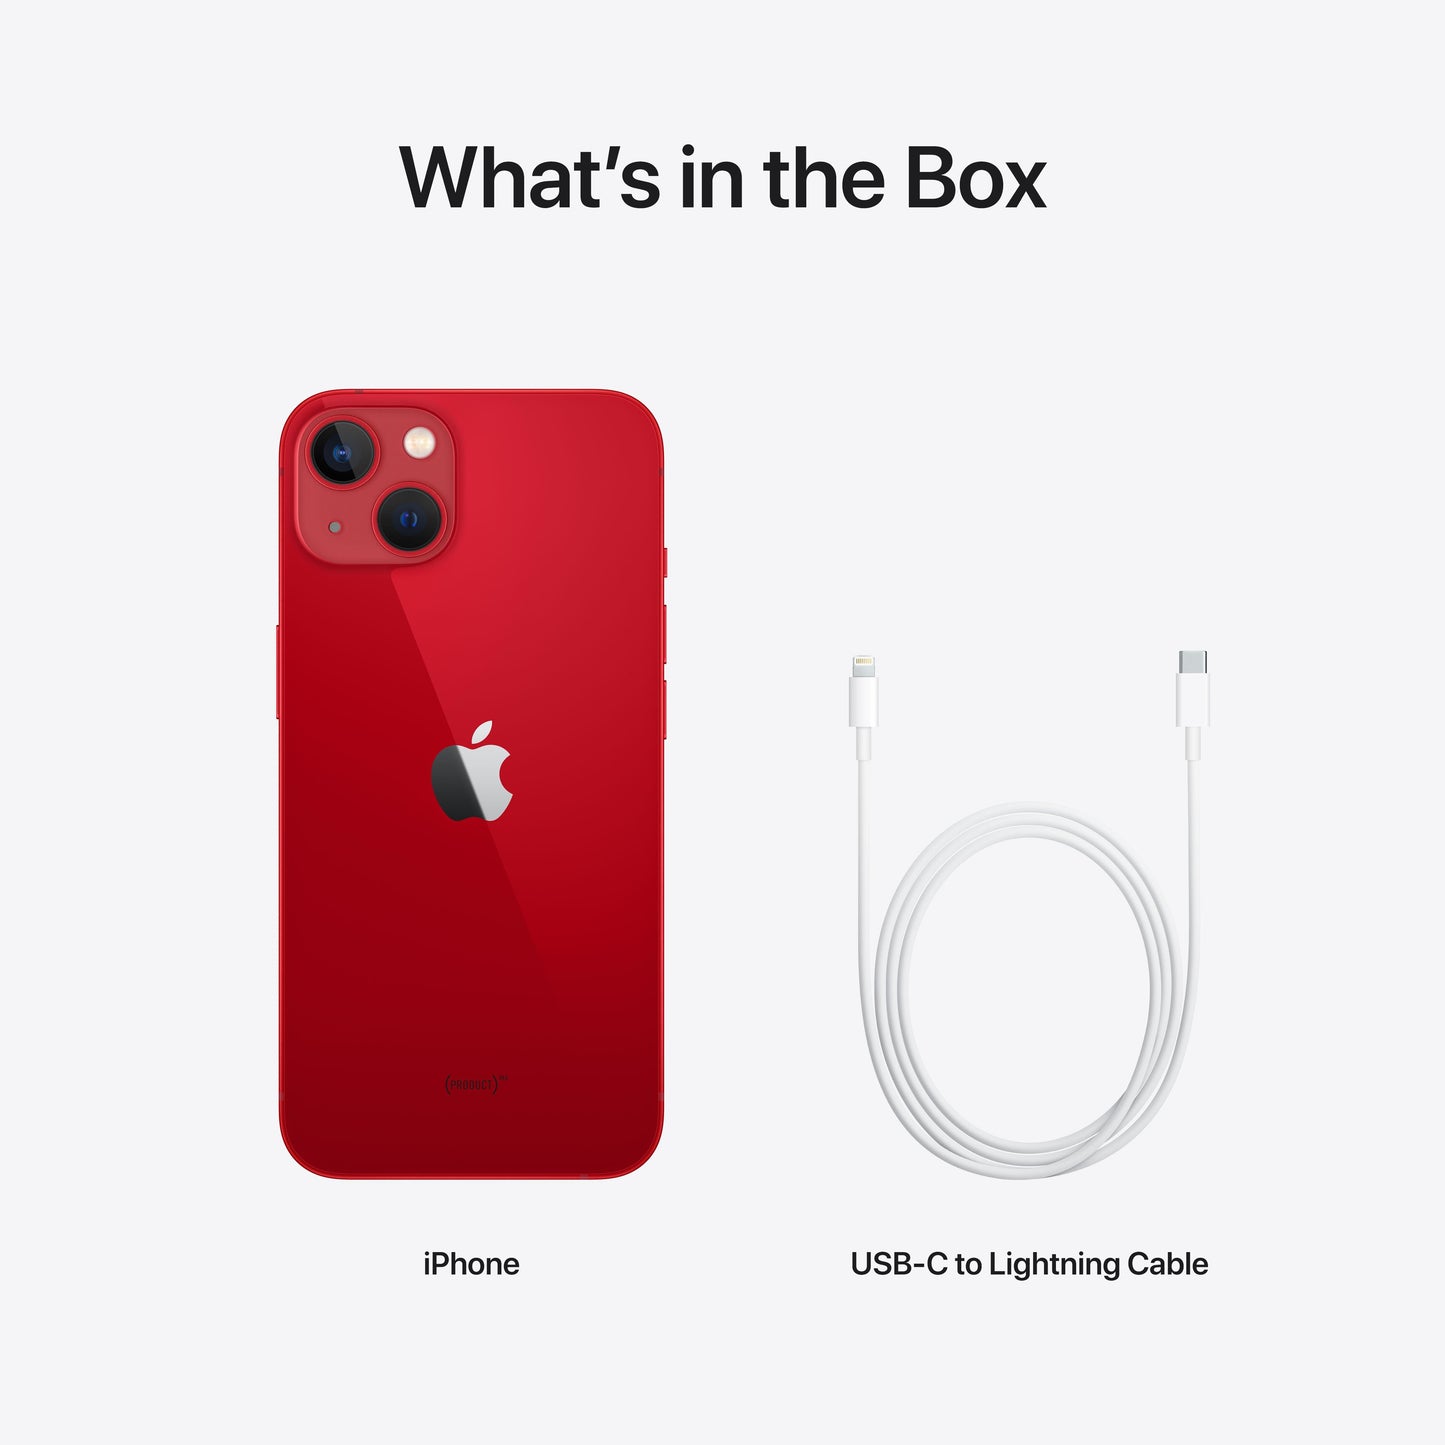 iPhone 13 512GB (PRODUCT)RED